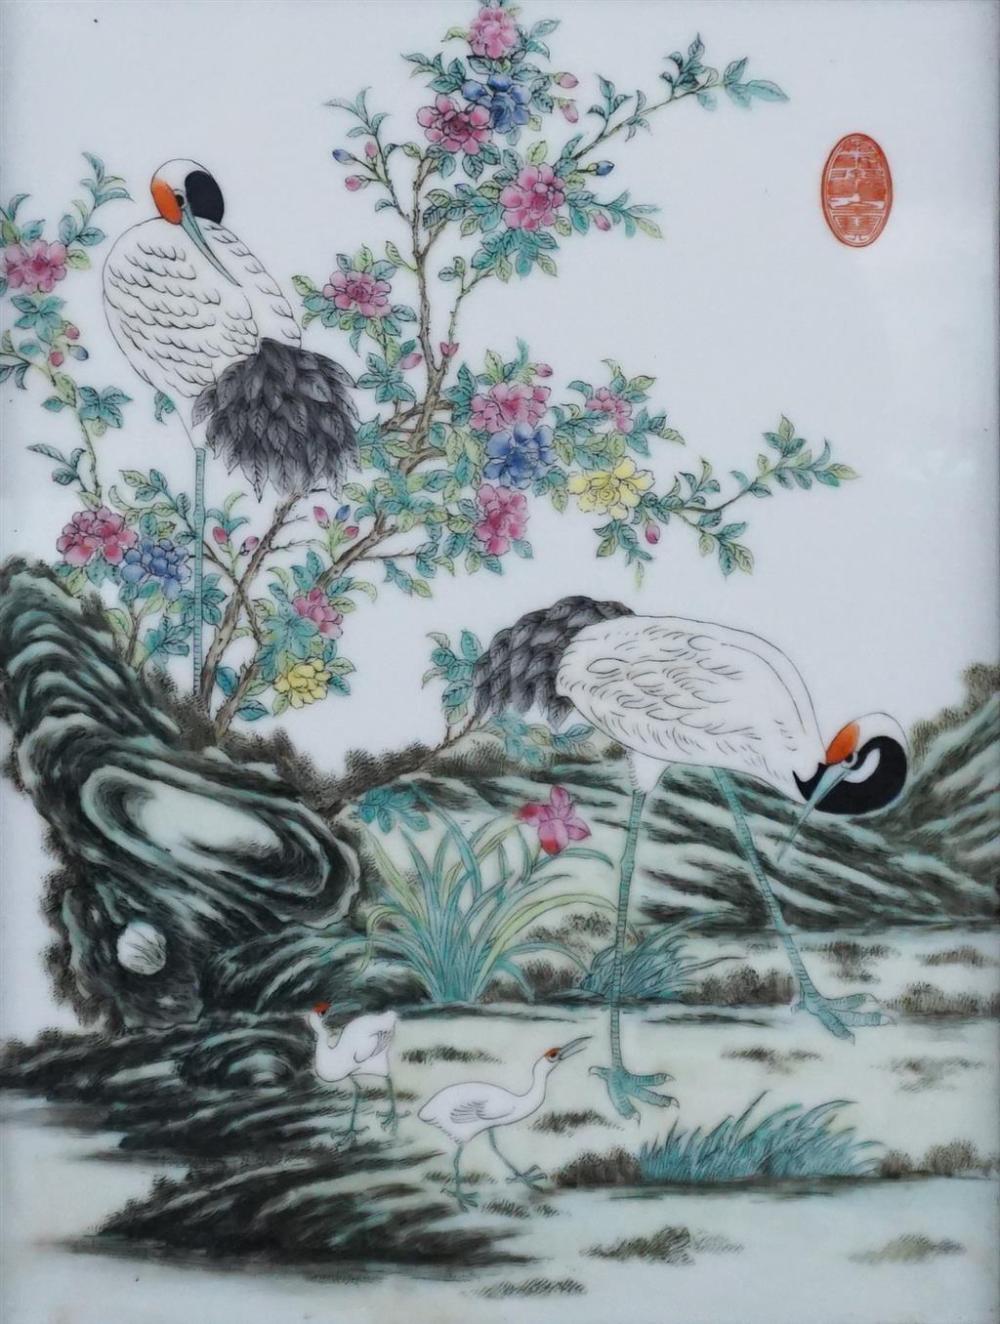 CHINESE PORCELAIN PLAQUE IN A HARDWOOD 327f57